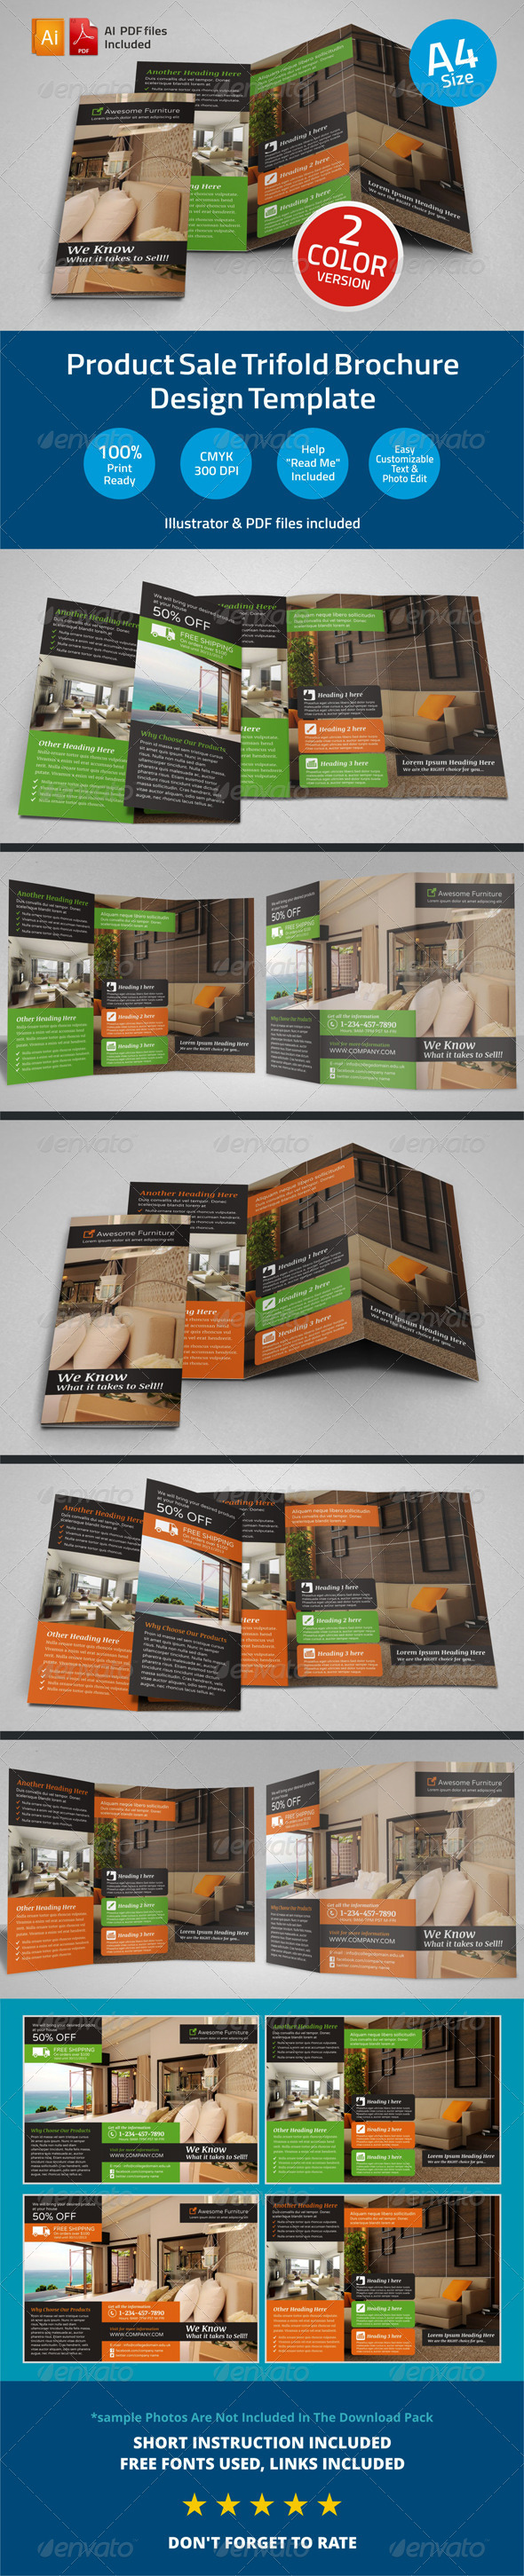 Product Sale Trifold Brochure Template By Jbn Illa